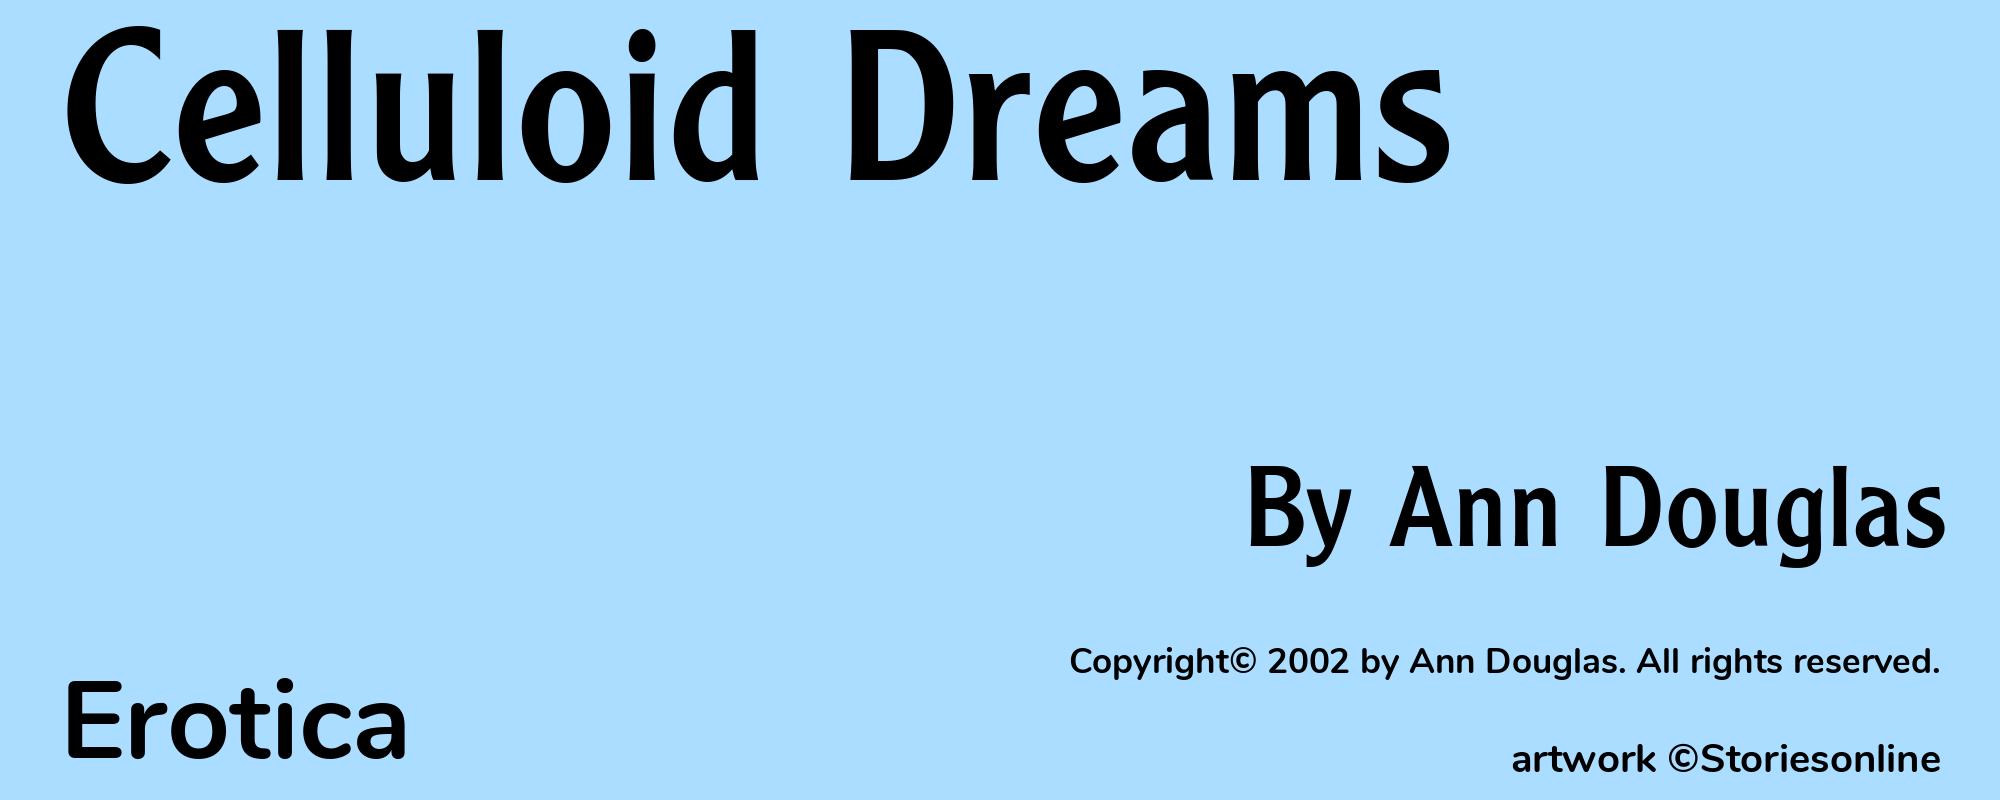 Celluloid Dreams - Cover